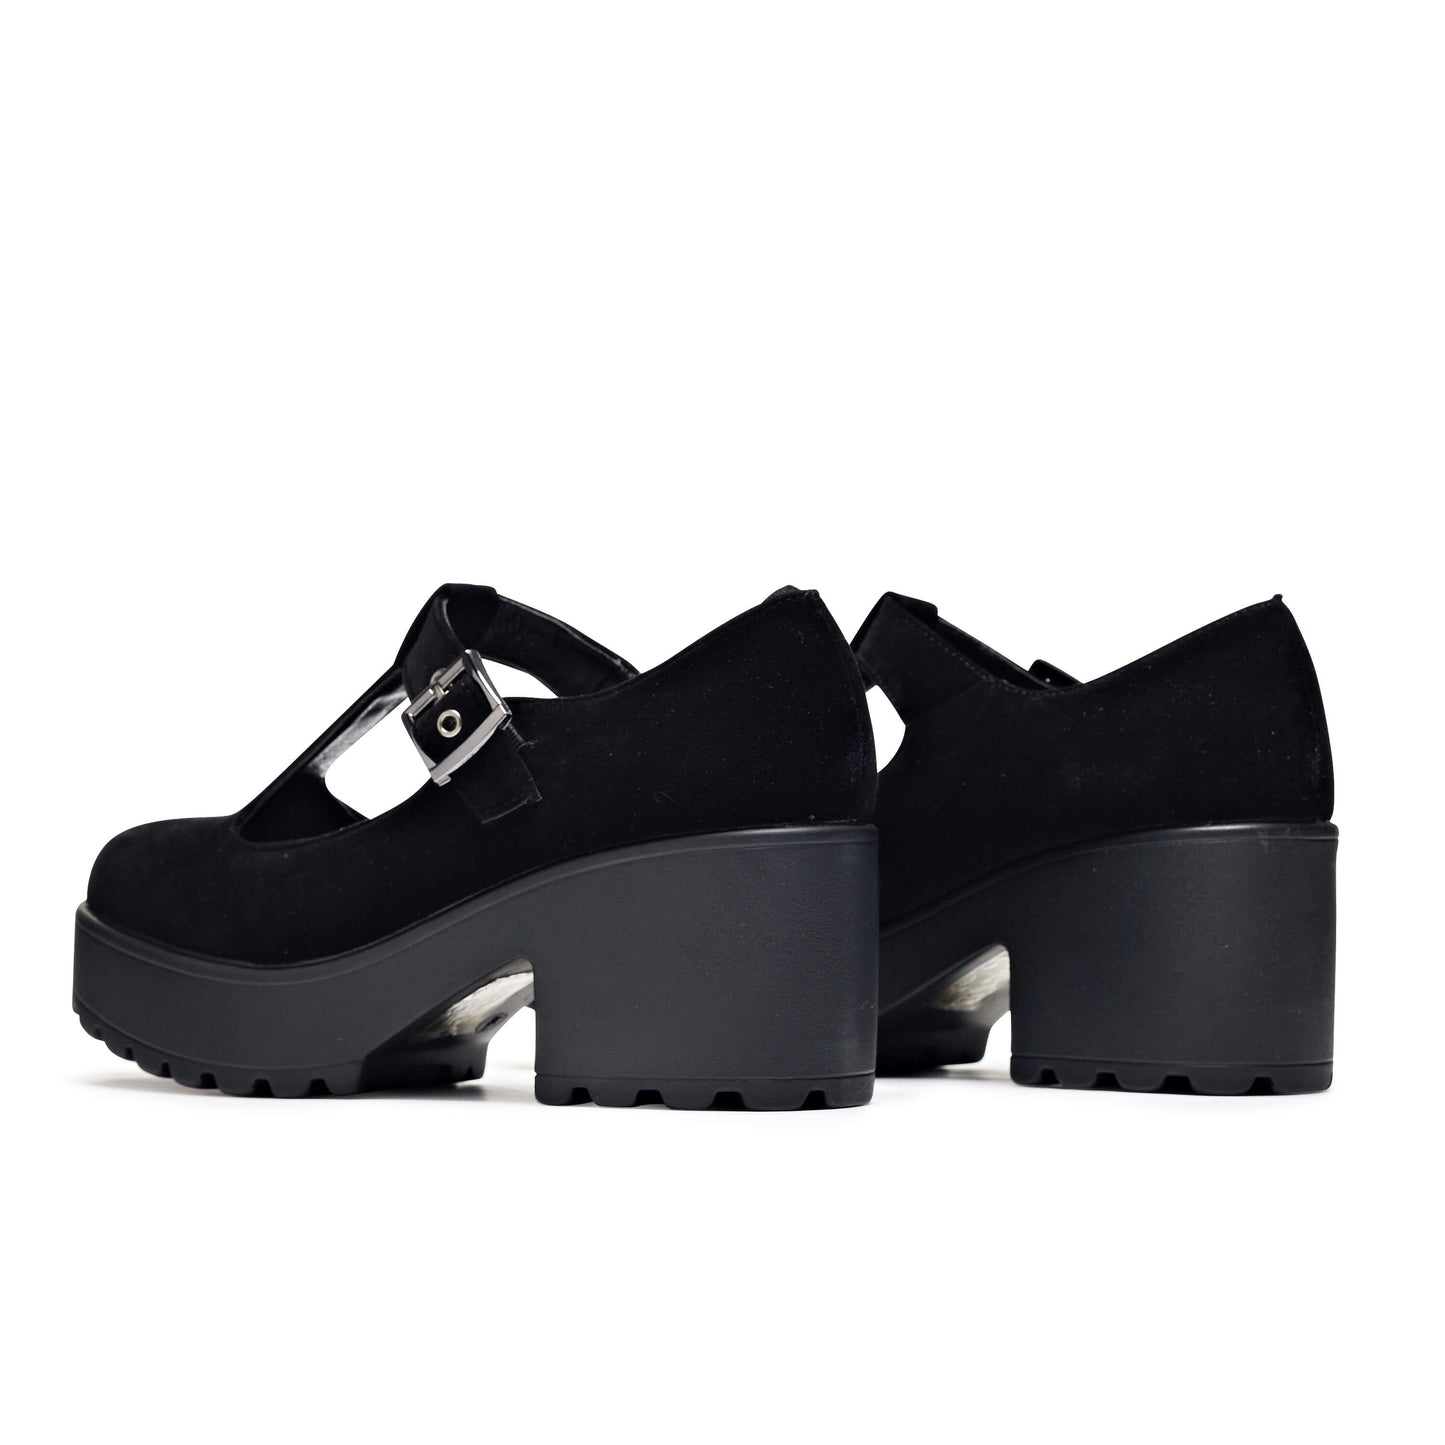 Sai Black Mary Jane Shoes 'Suede Edition' - Mary Janes - KOI Footwear - Black - Back View